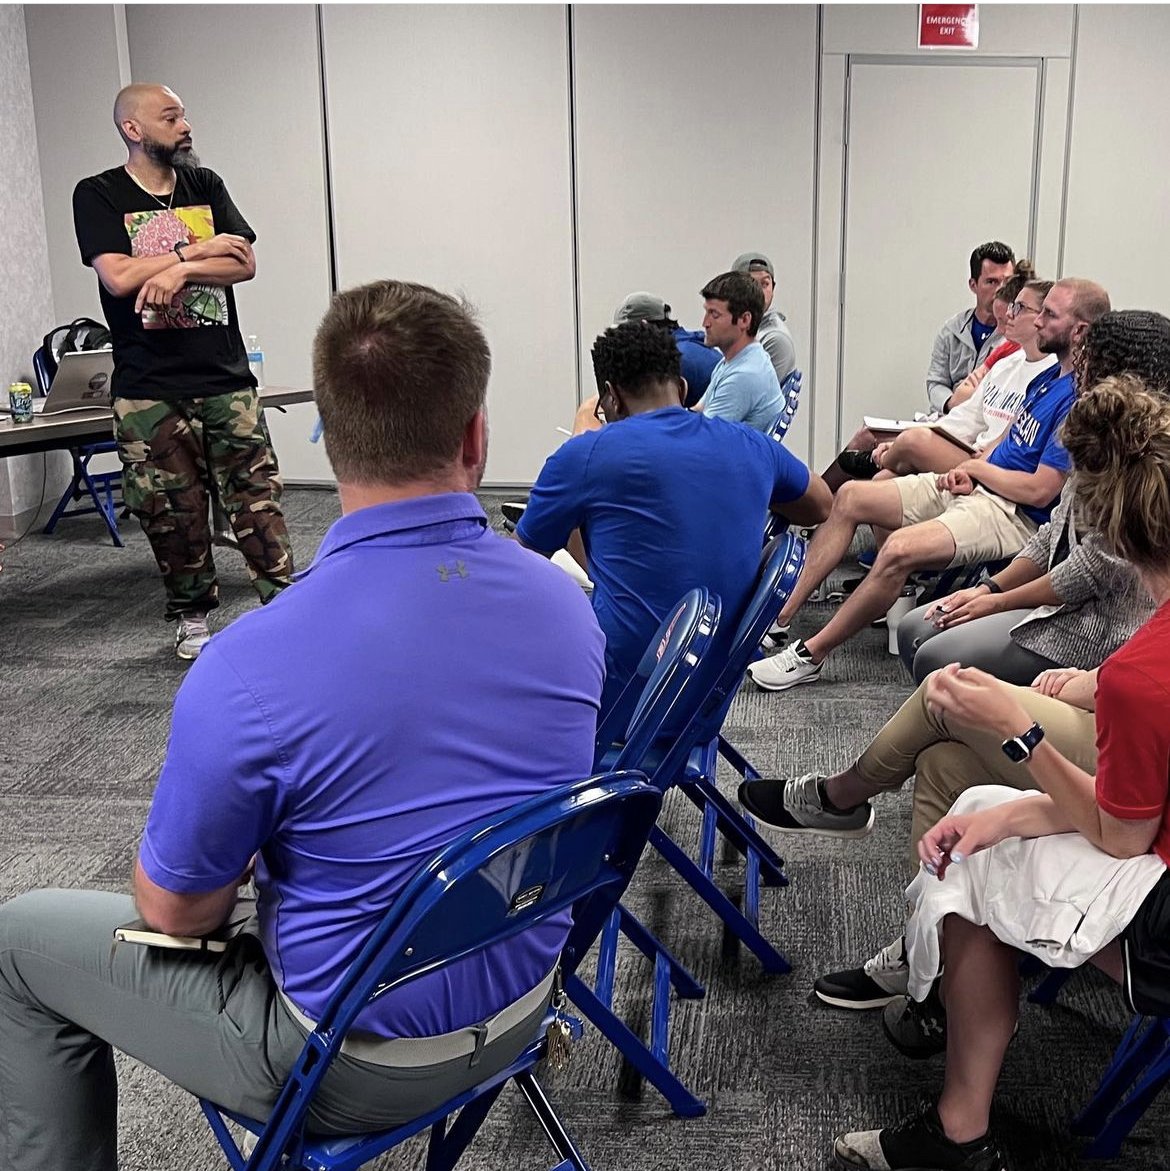 Repost from @aueagles
•
Kyle Williams, the Chief Empowerment Officer of @alongtalk2020, recently led the entire AU Athletics staff through a journey that helps tear down the walls of ignorance with the goal of empowering participants to become actively anti-racist.